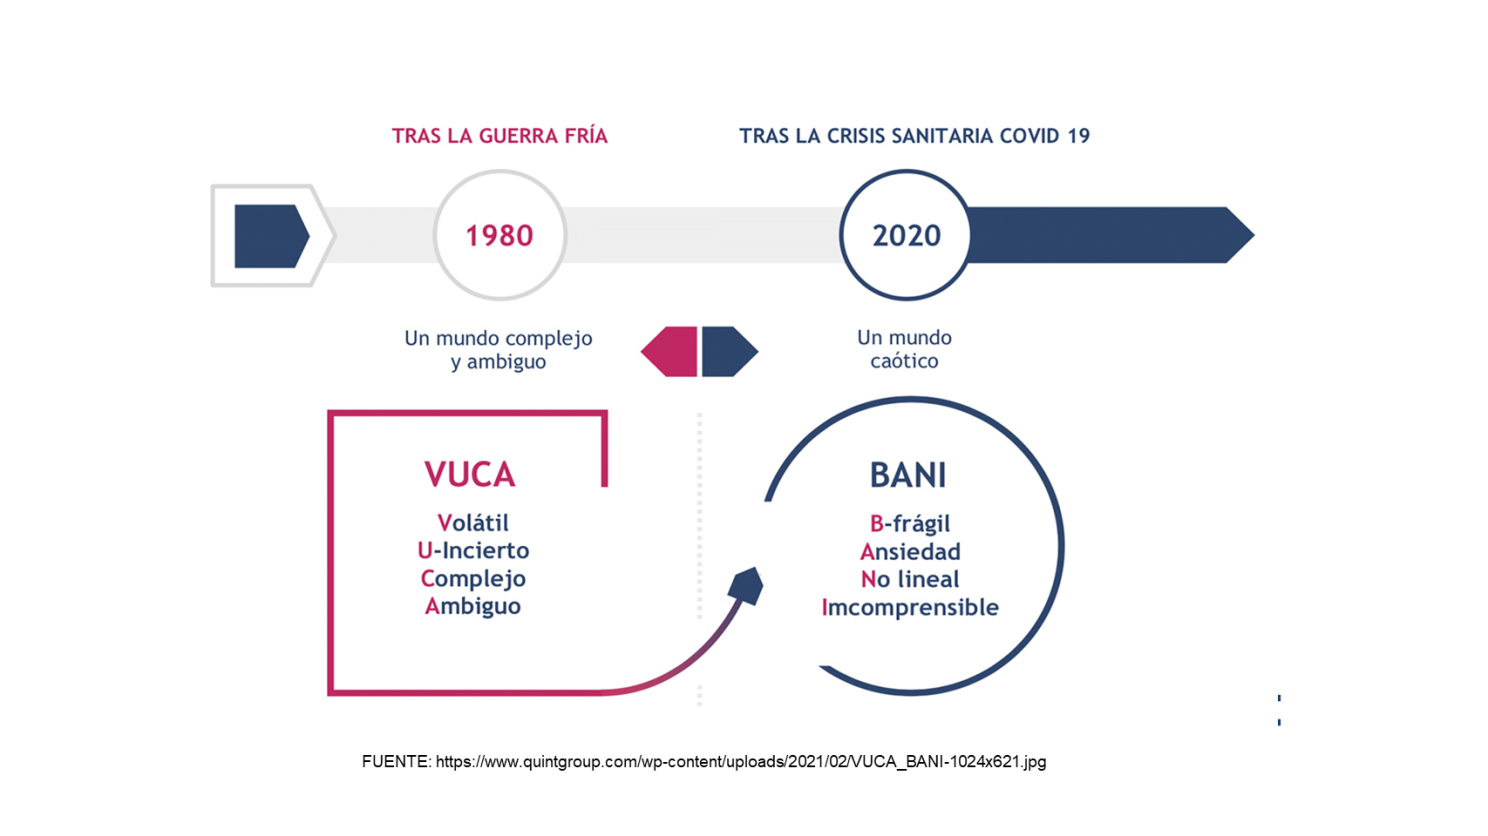 From VUCA to BANI: the new global environment that is challenging your organization